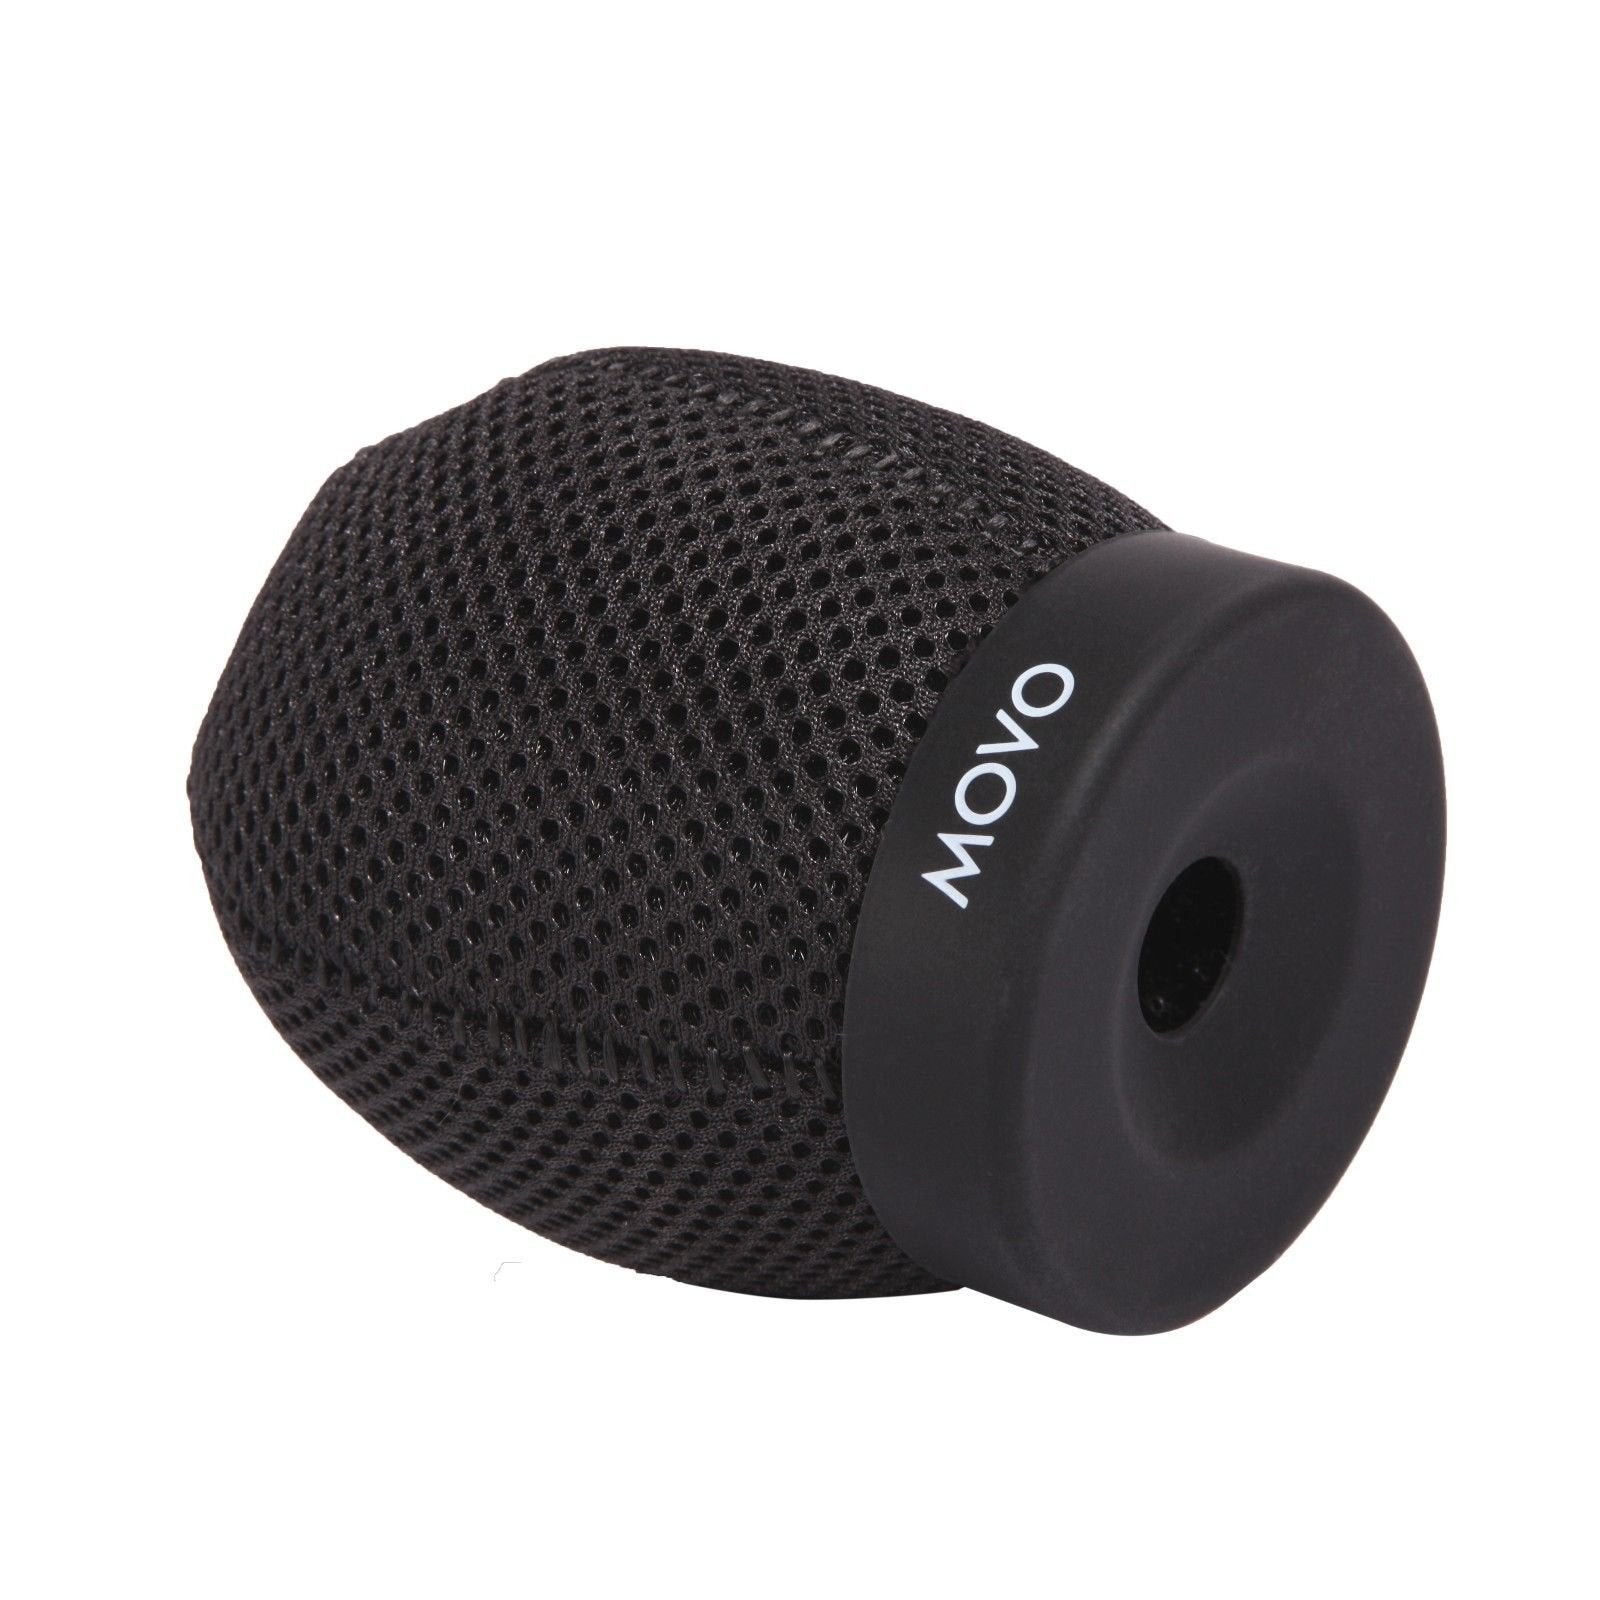 Movo WST120 Professional Premium Quality Ballistic Nylon Windscreen with Acoustic Foam Technology for Shotgun Microphones up to 10cm Long  - Like New